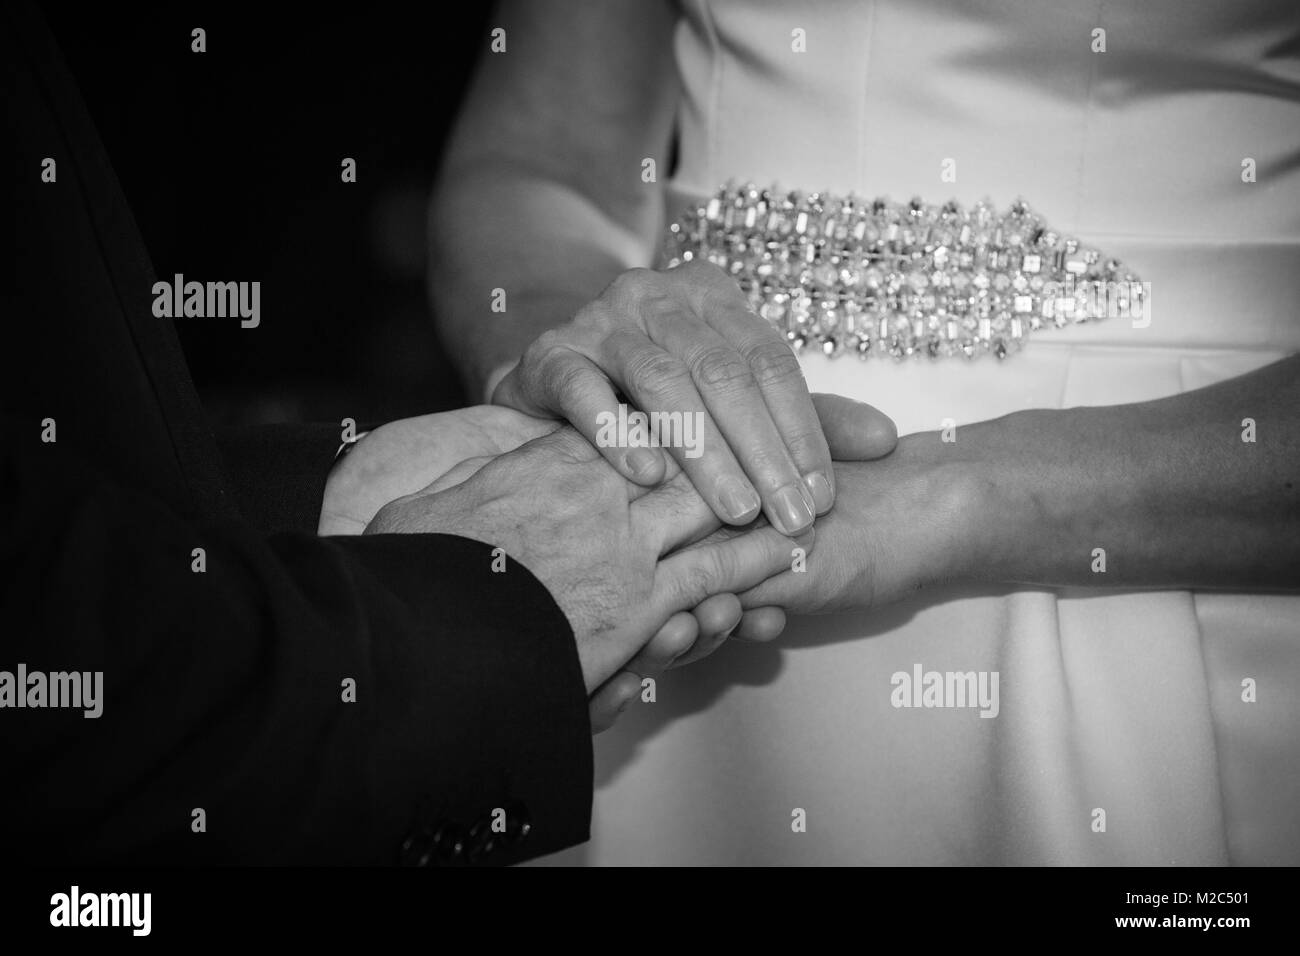 Bride and groom exchanging vows, holding hands, mid section, close-up, black and white Stock Photo